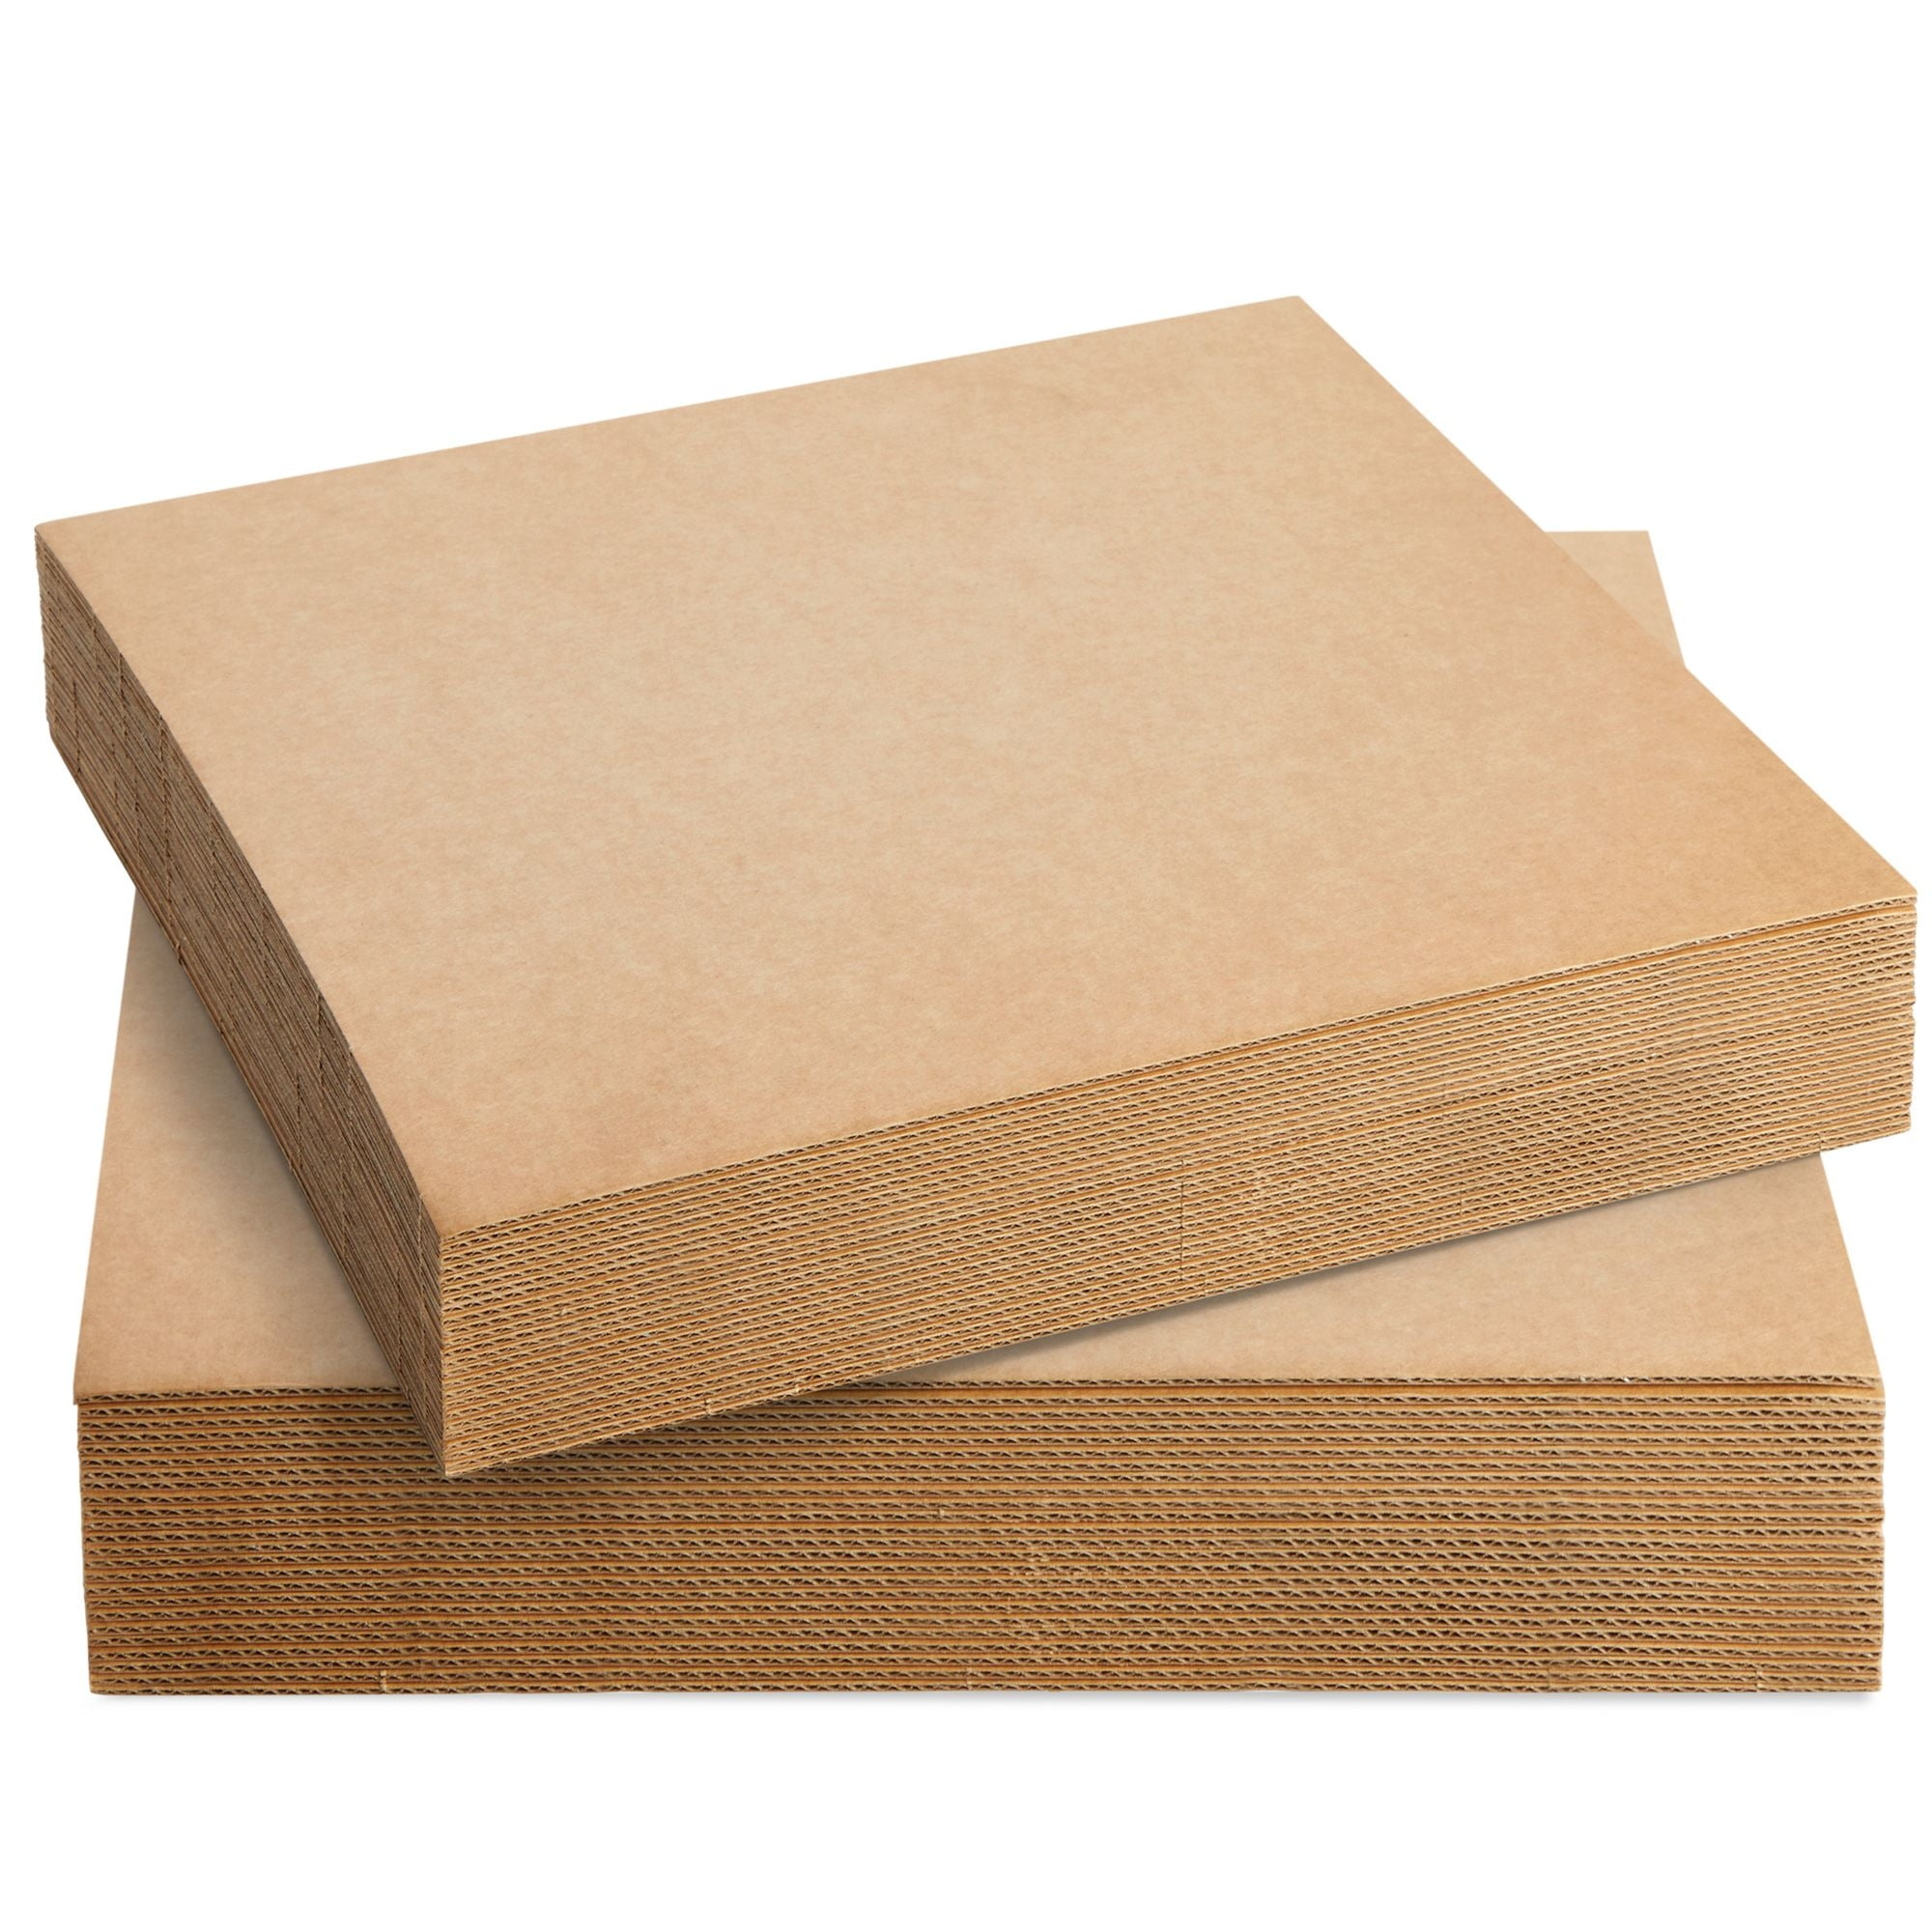 24 pt Chip Board Sheets for Packaging